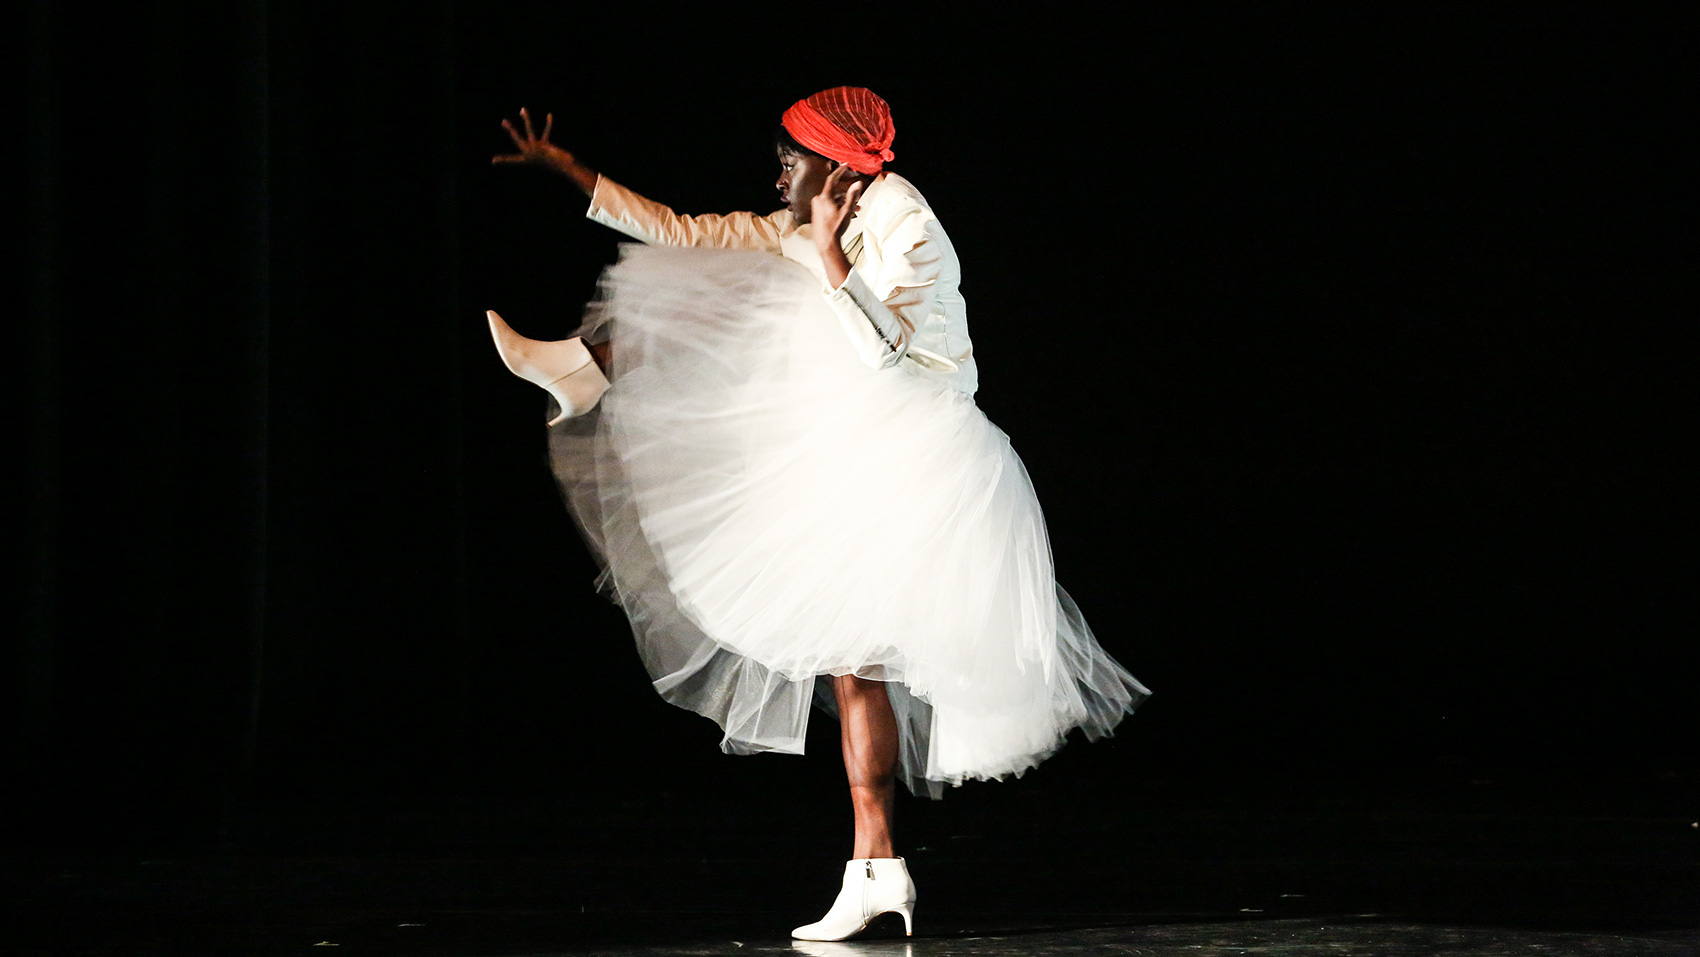 A Black woman dancer wearing a white shirt, white tutu skirt, and white ankle boots. The picture captures her mid-dance-pose from the side. she is in profile. She raises one leg to her chest, stretches one hand in front with her palm facing out.